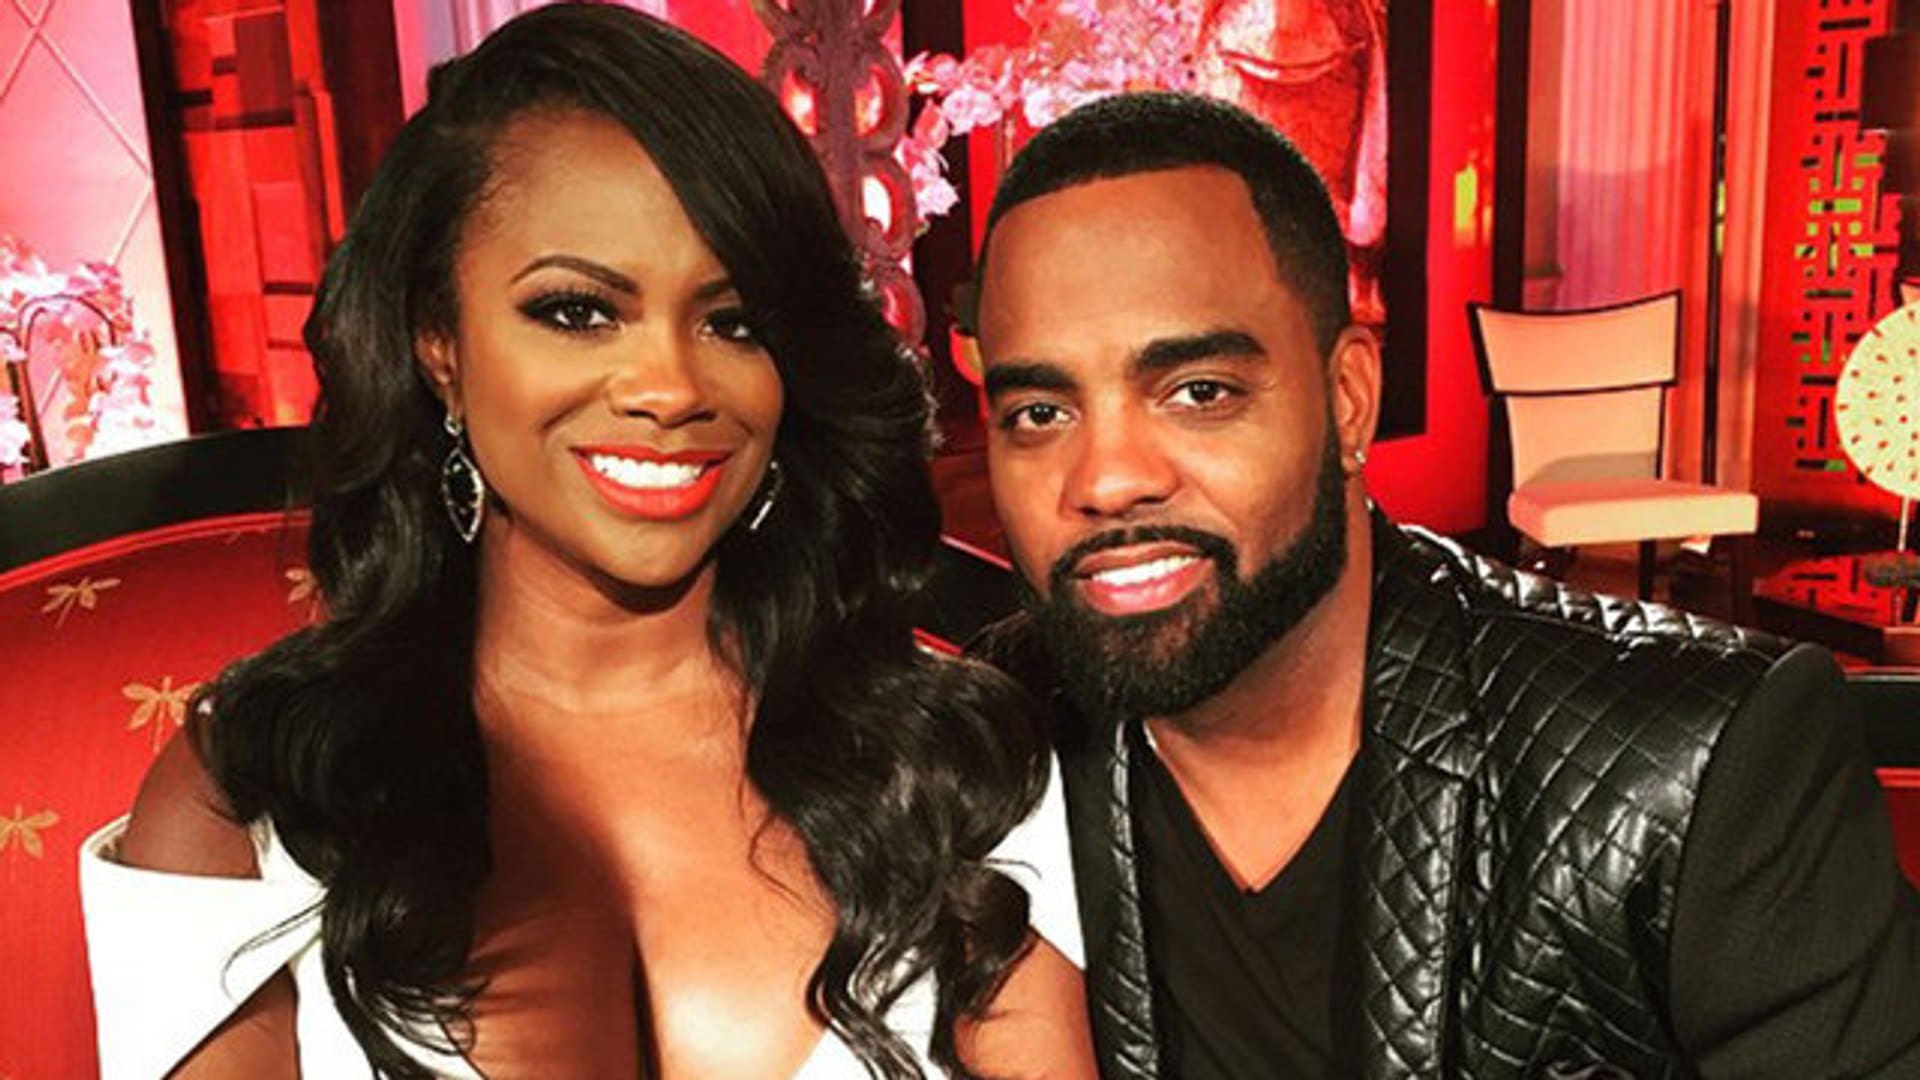 Kandi Burruss And Todd Tucker Are Shining In White And Some Fans Call Them 'Power Couple'